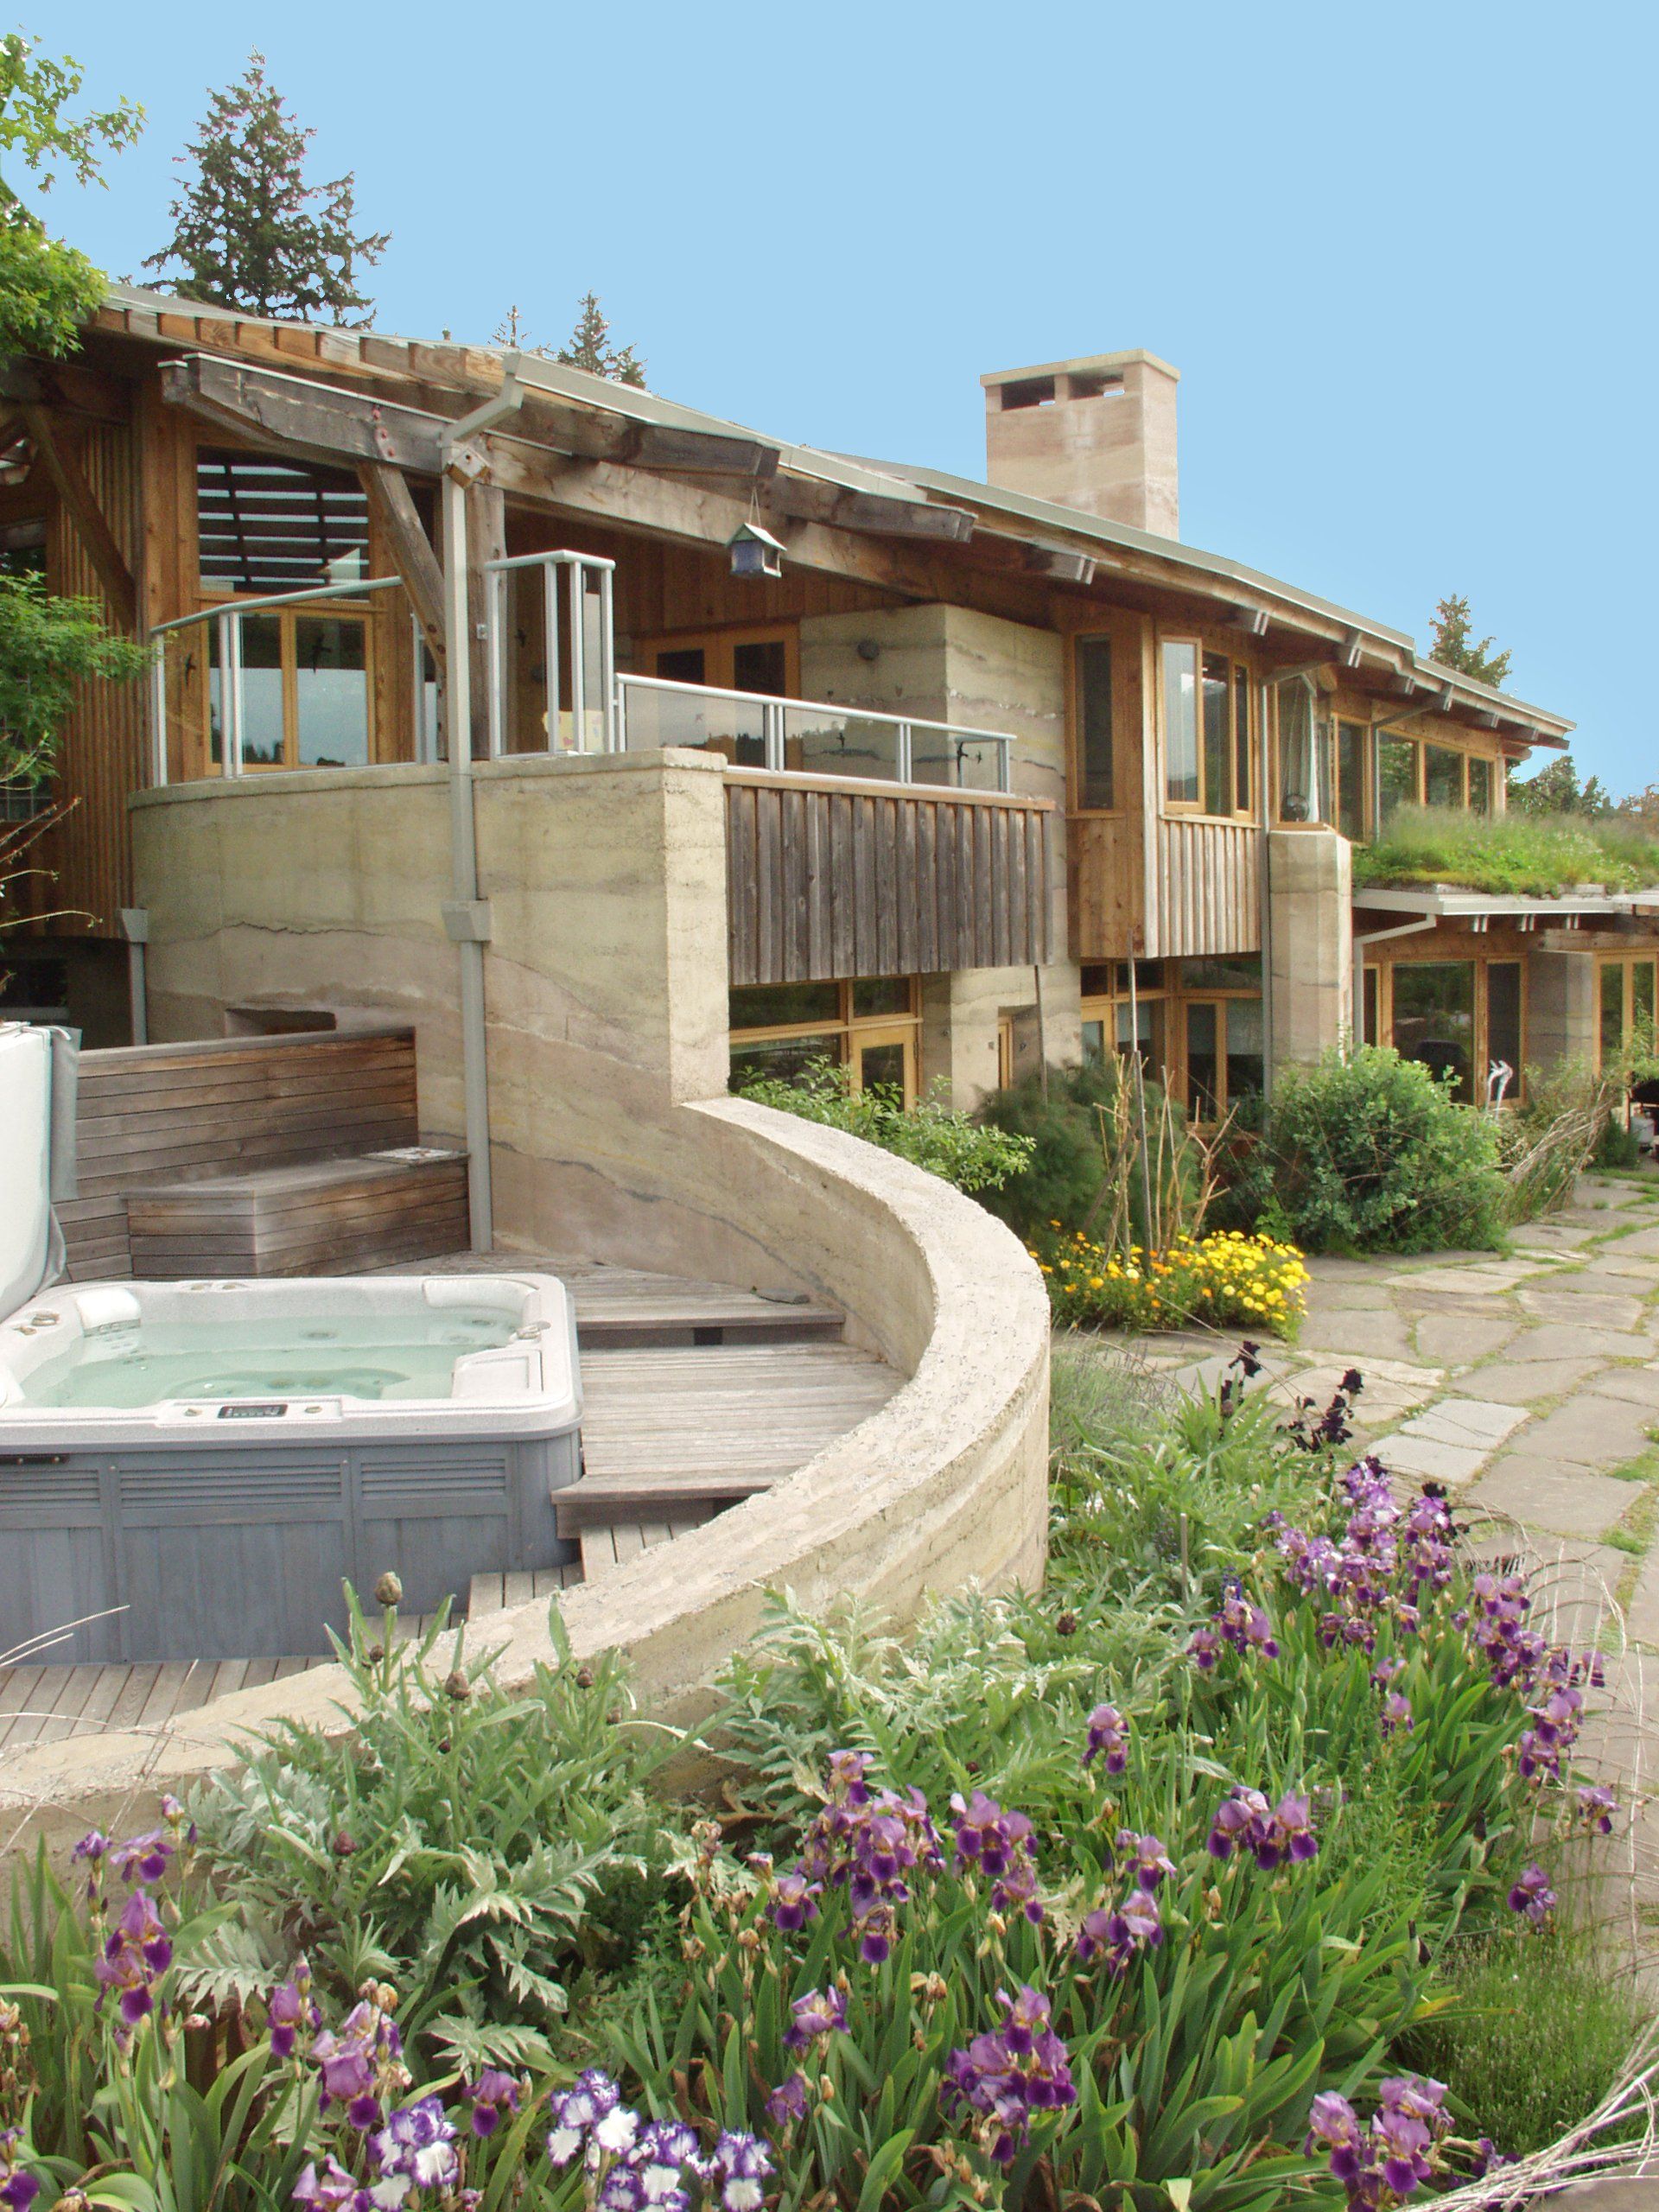 two story SIREWALL house with curved rammed earth walls surrounding a hot tub